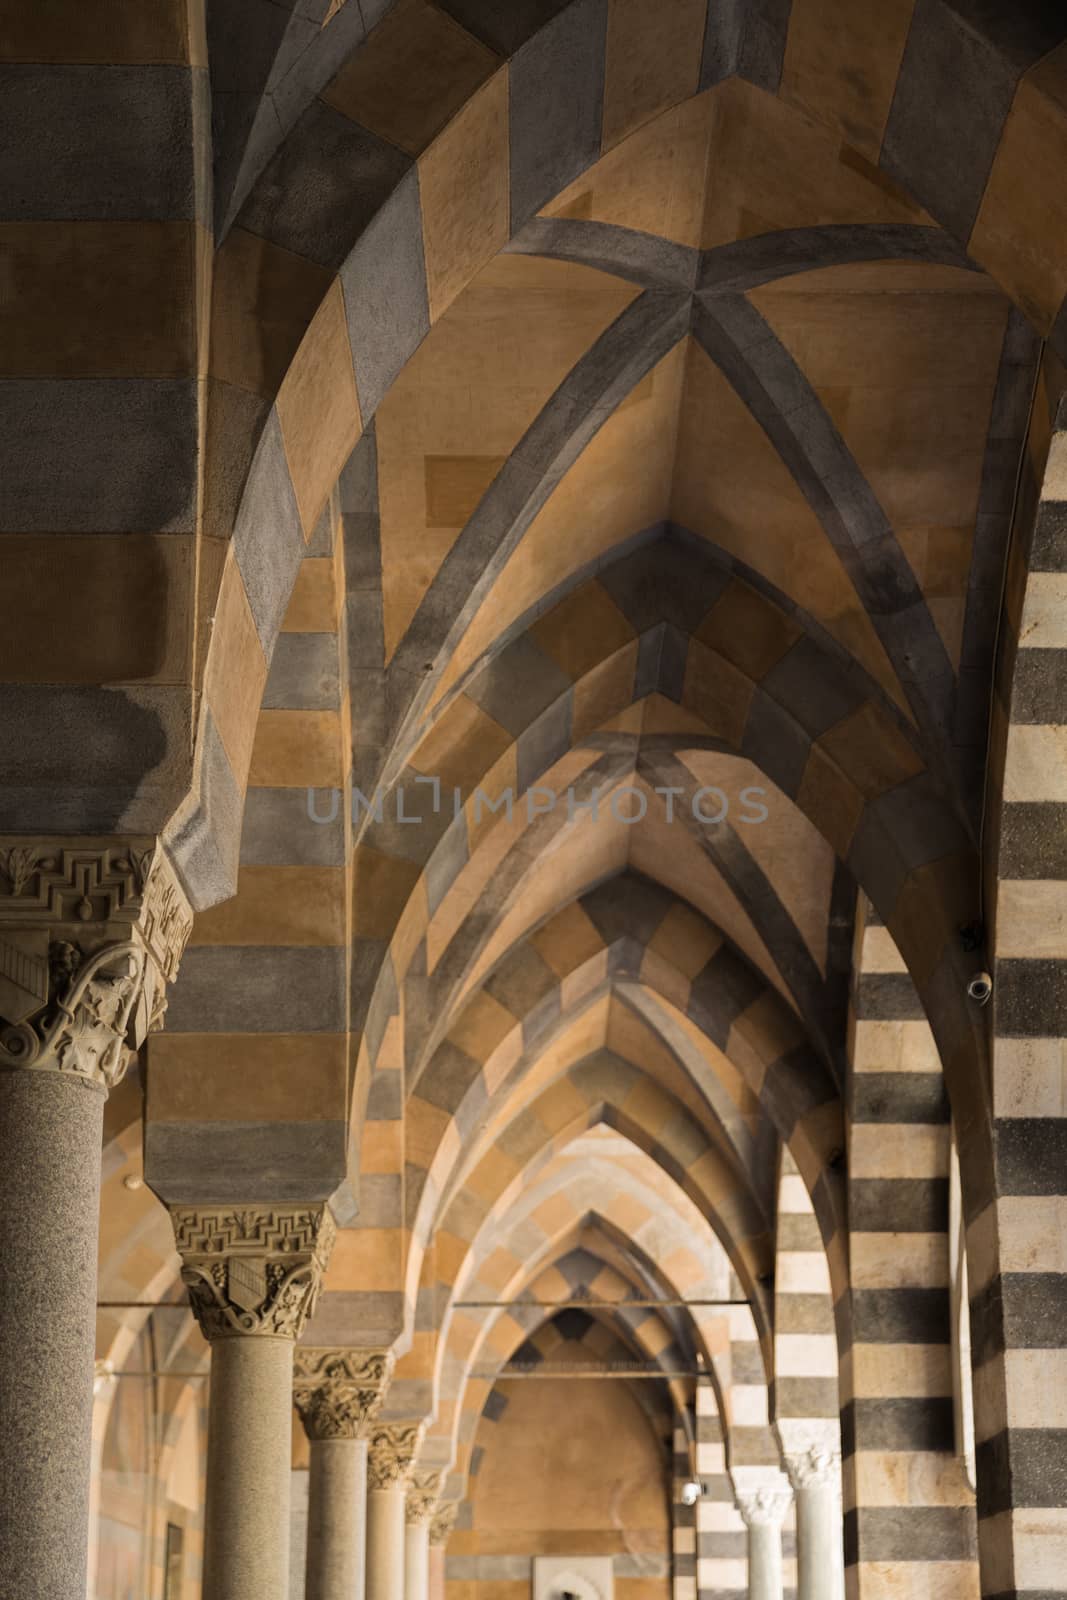 A shot from under the arches of the Amalfi Cathedral